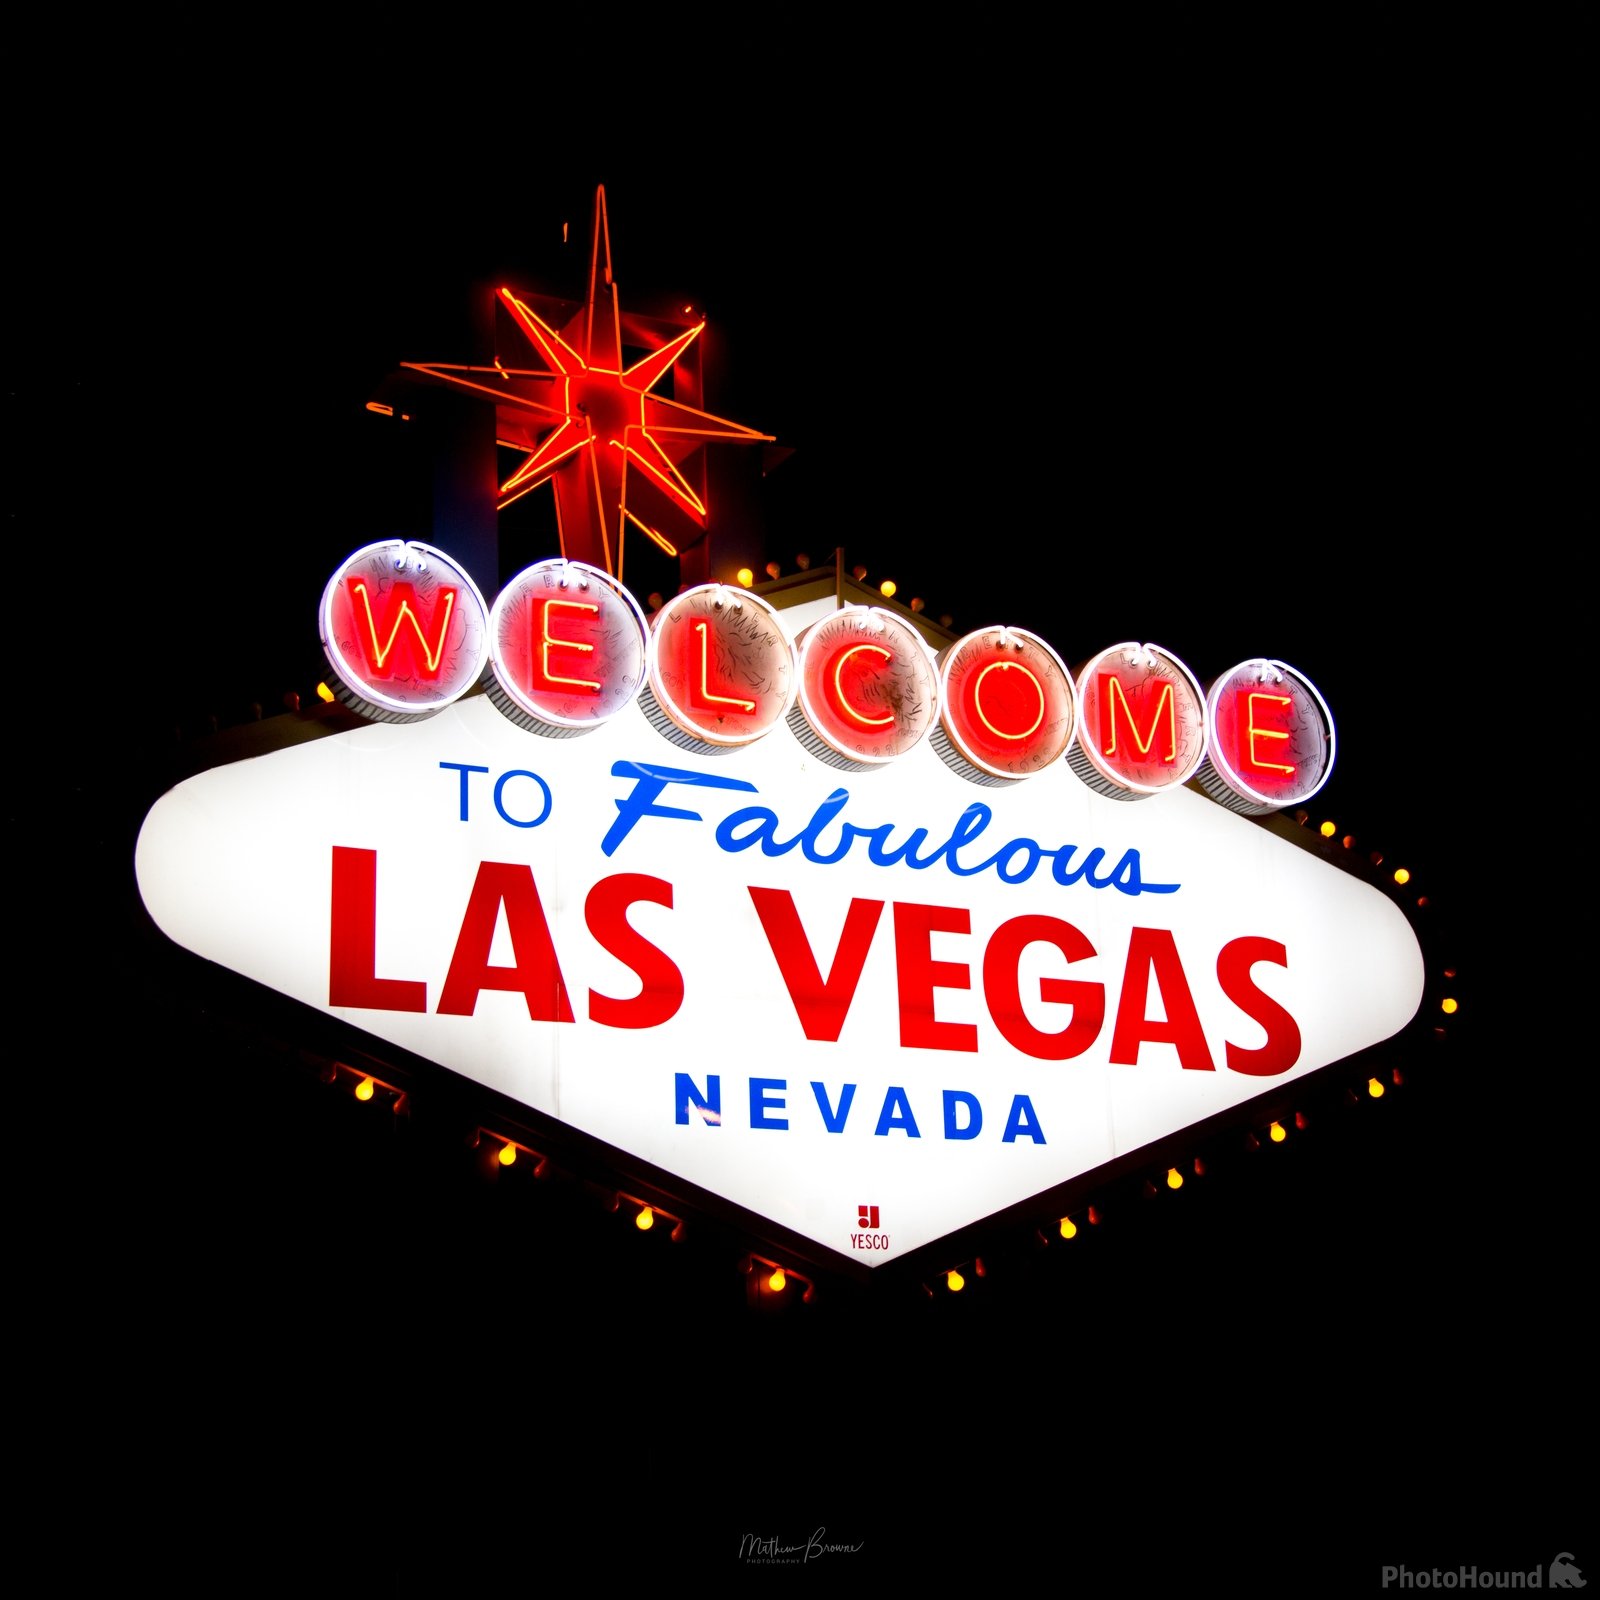 Image of Welcome To Fabulous Las Vegas by Mathew Browne